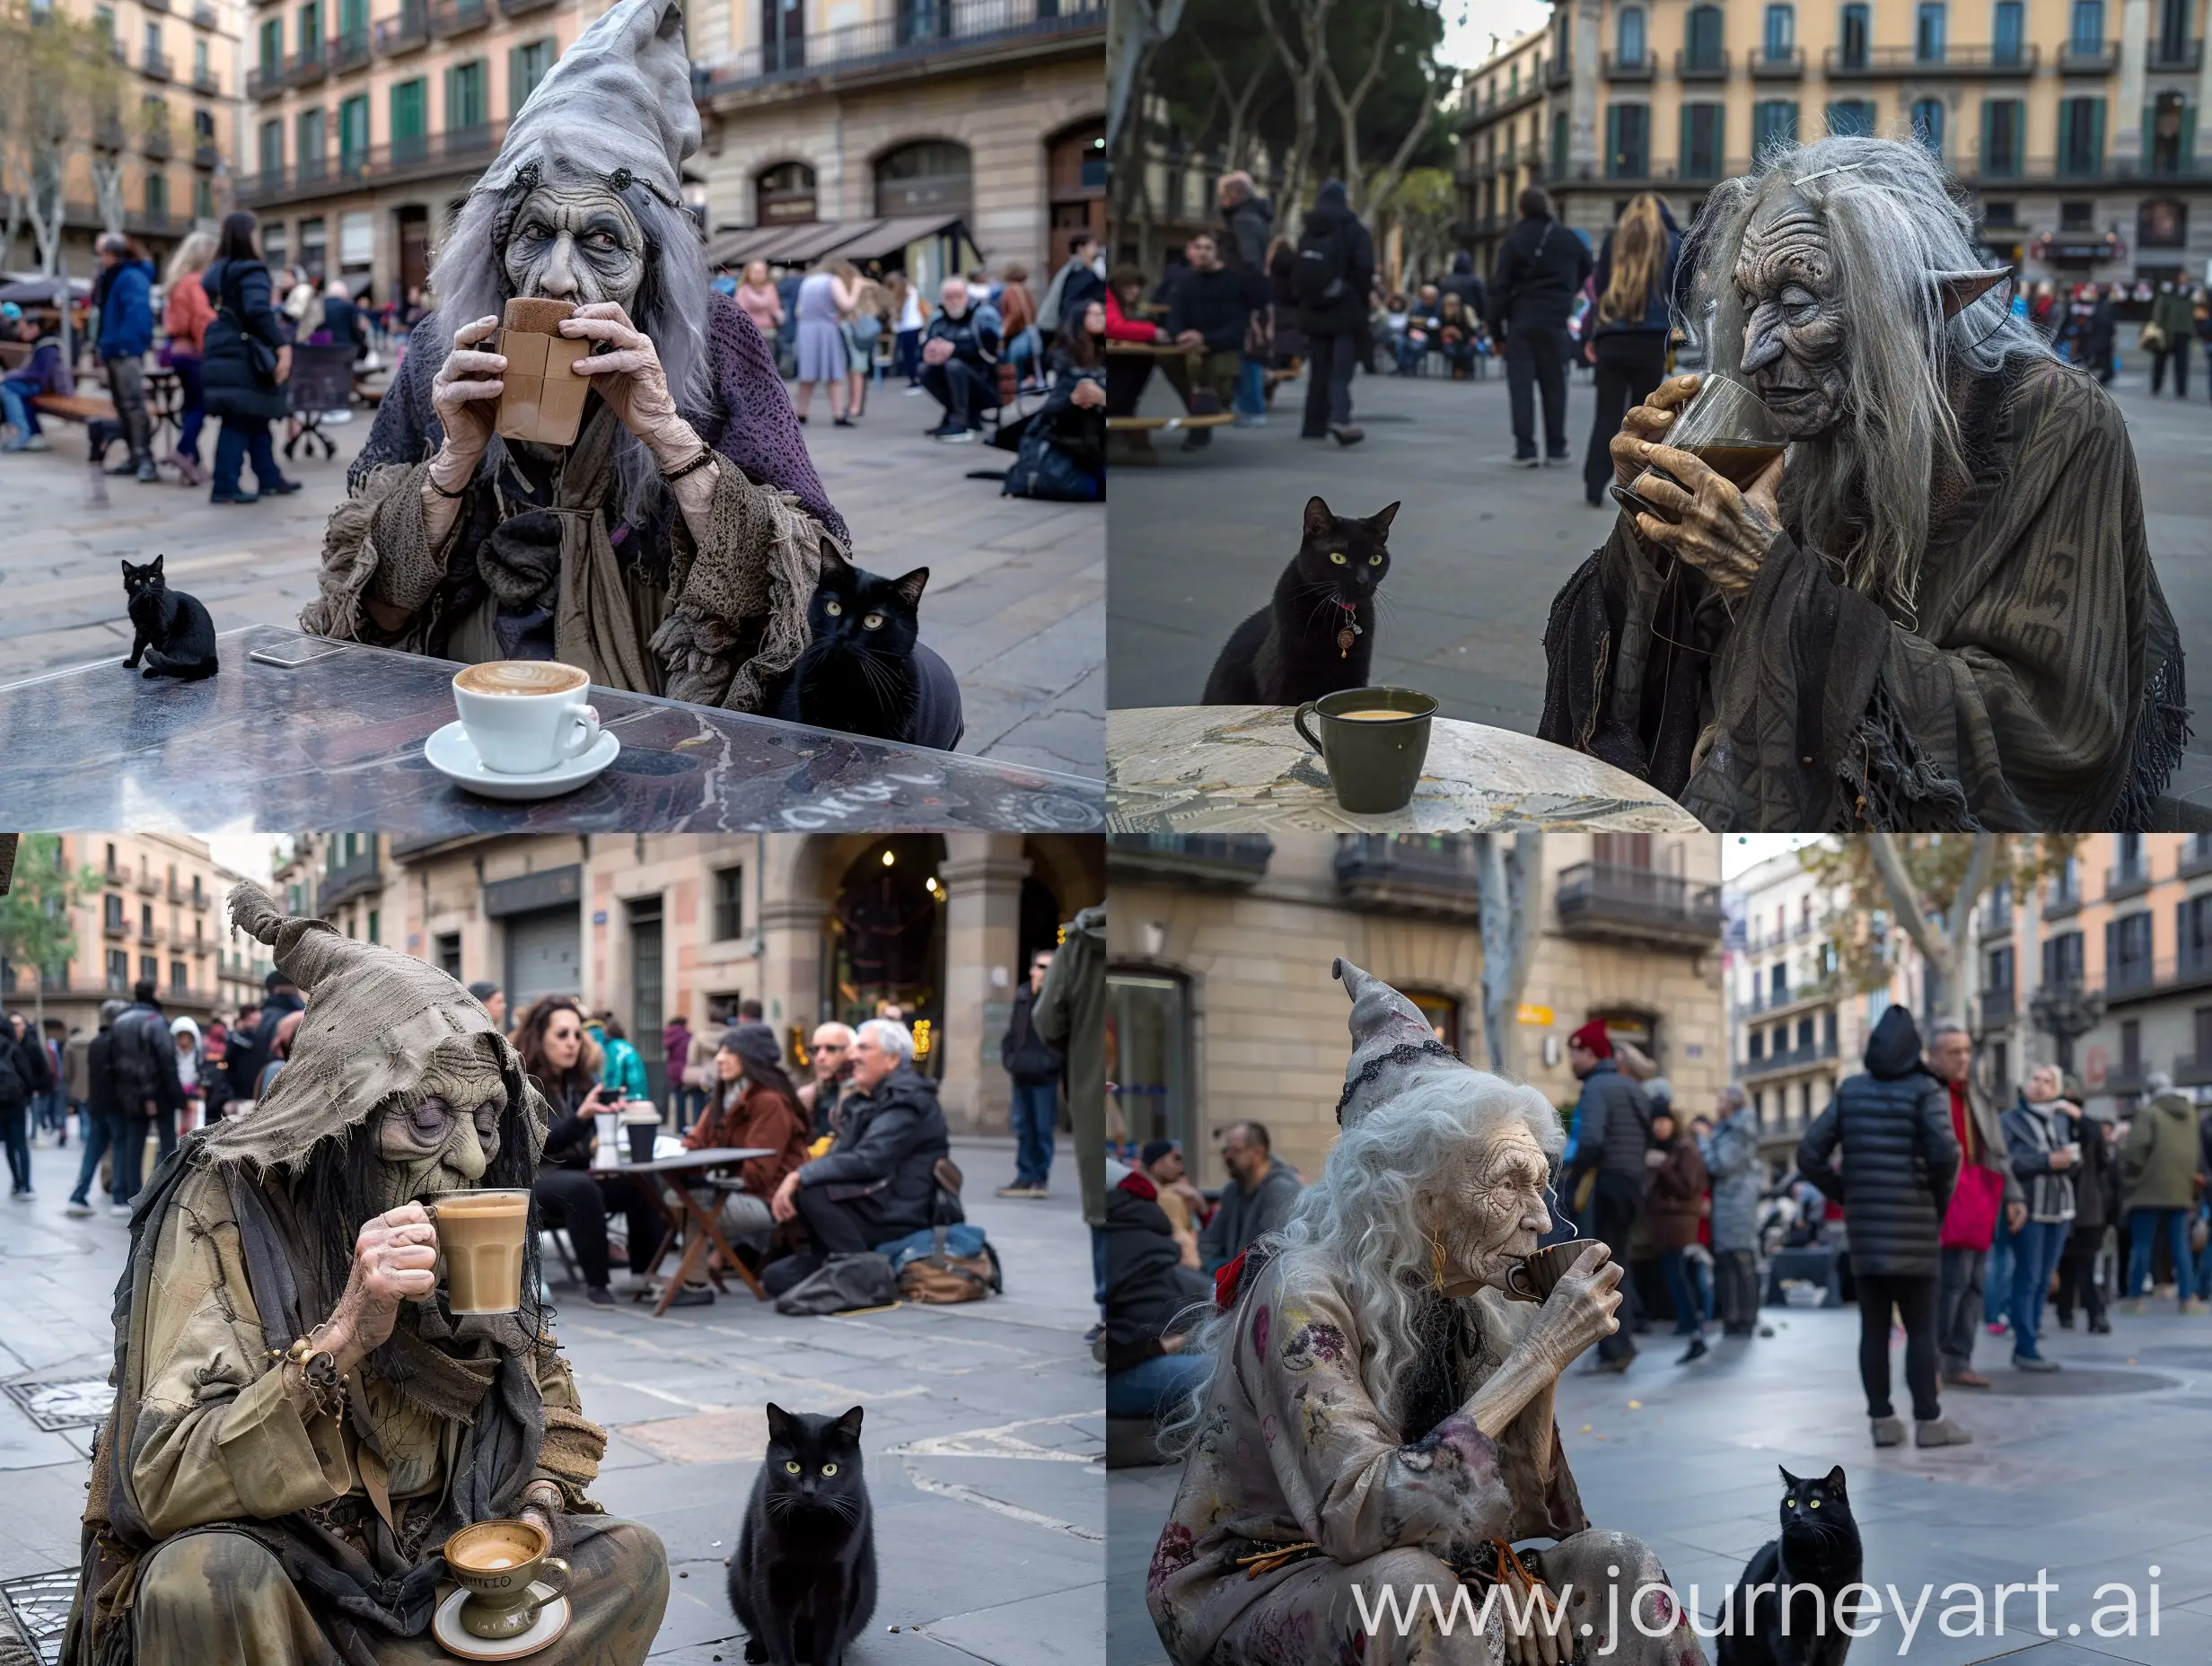 The Baba Yaga, photorealistic, is drinking coffee on the main square of Barcelona, people watching transfixed, cinematic, realistic, pro photo. her black cat nearby